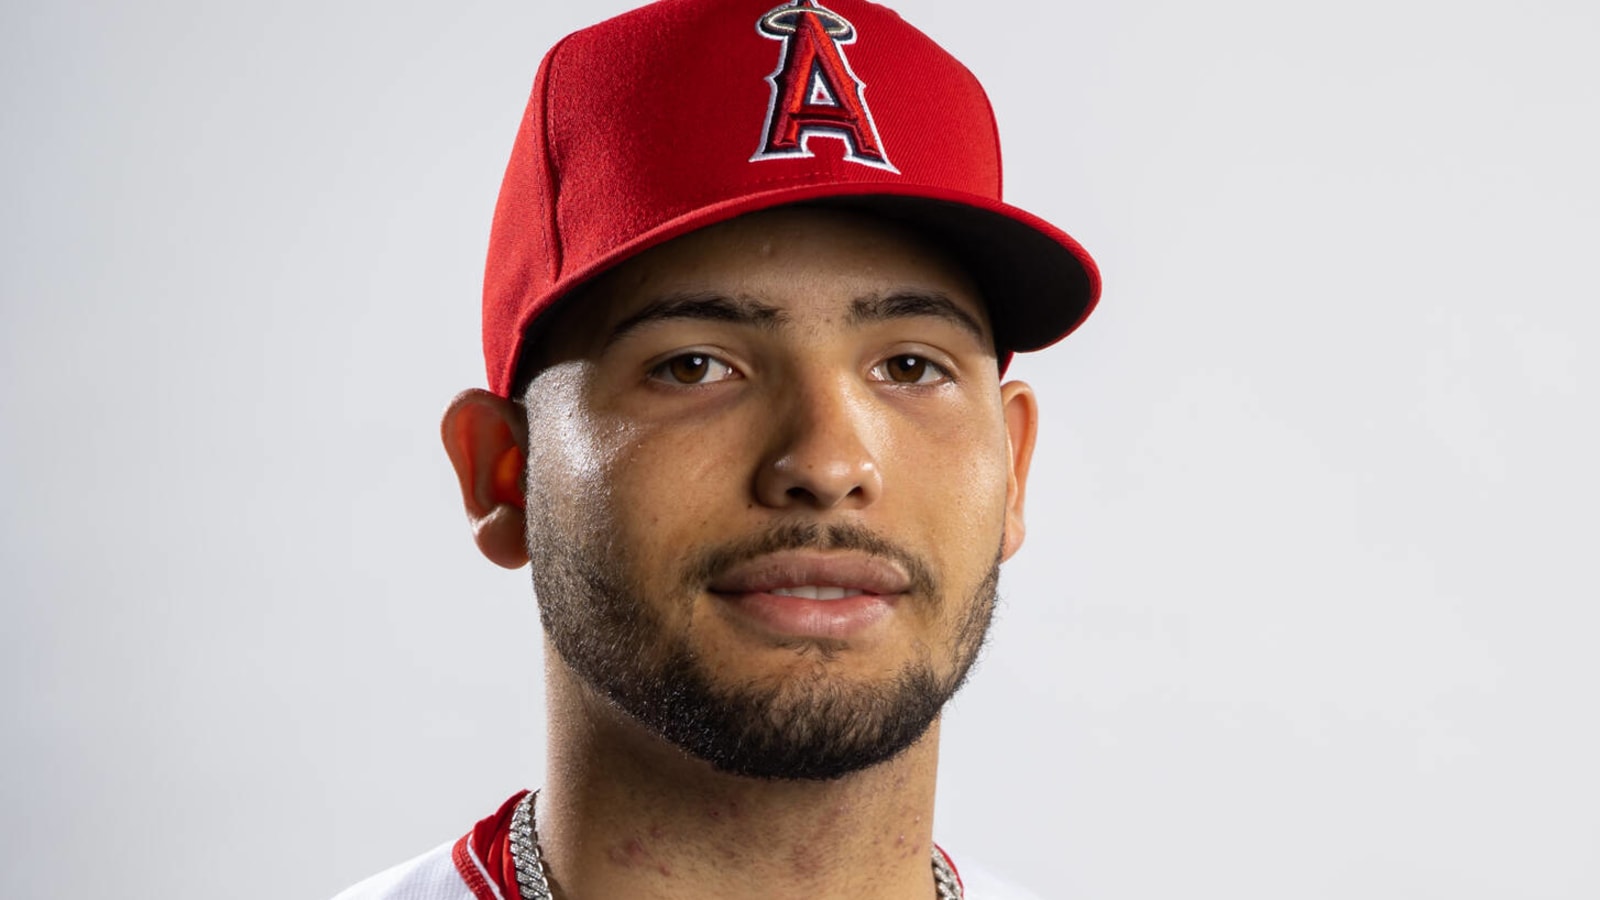 Angels Prospect Edgar Quero ‘Excited’ To Be Part Of Big League Spring Training